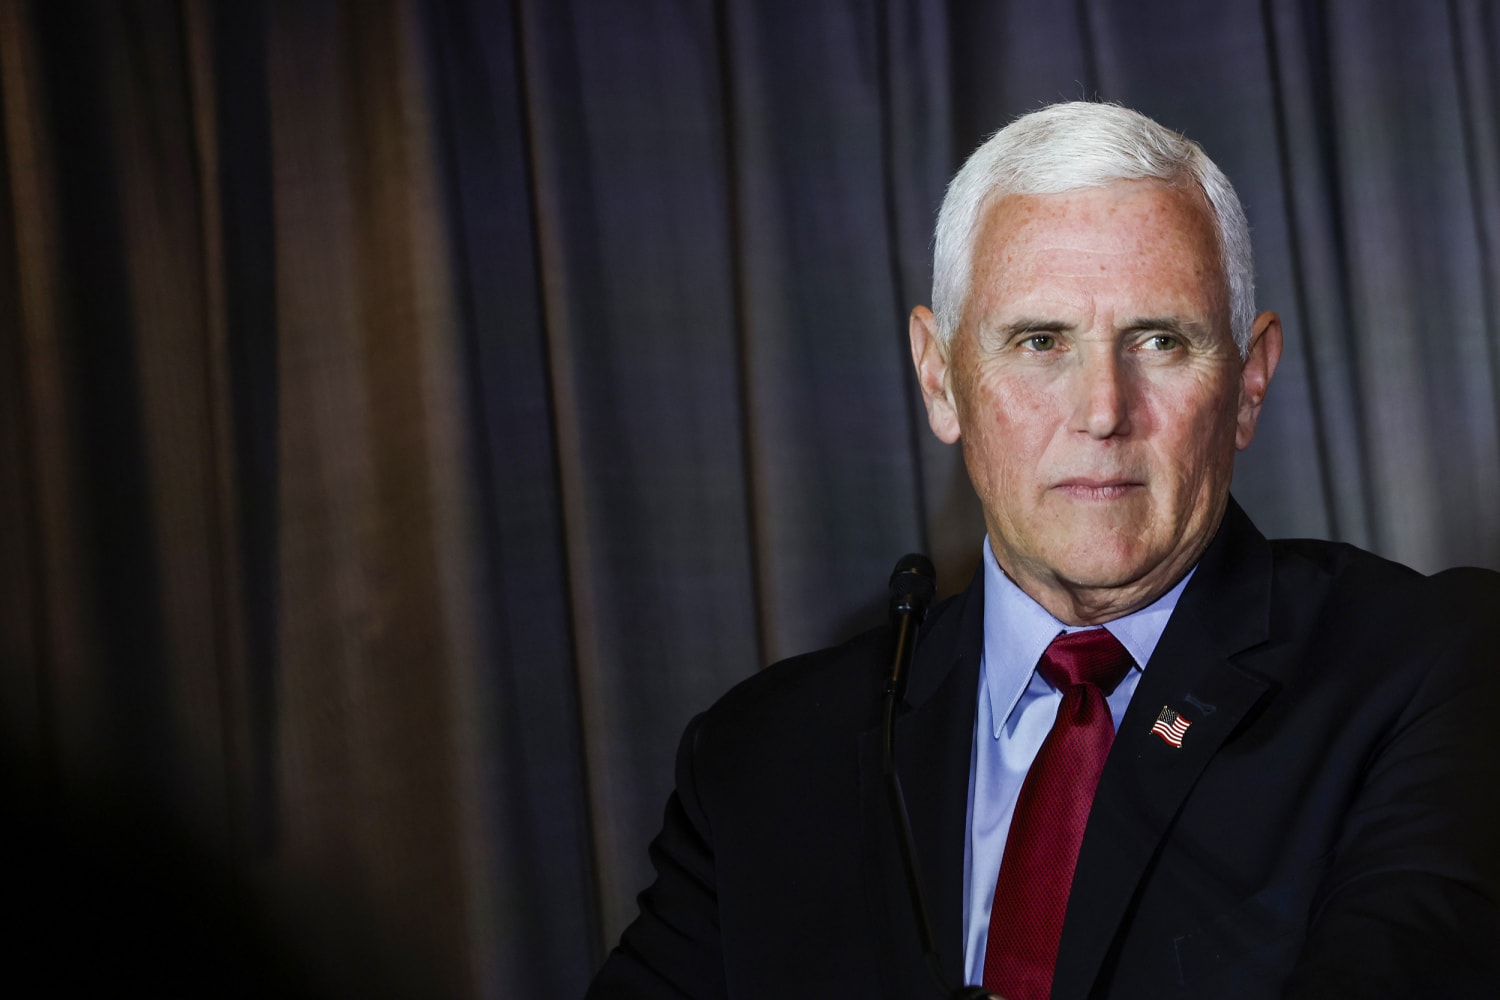 Pence says 'history will hold Donald Trump accountable' for Jan. 6 riot